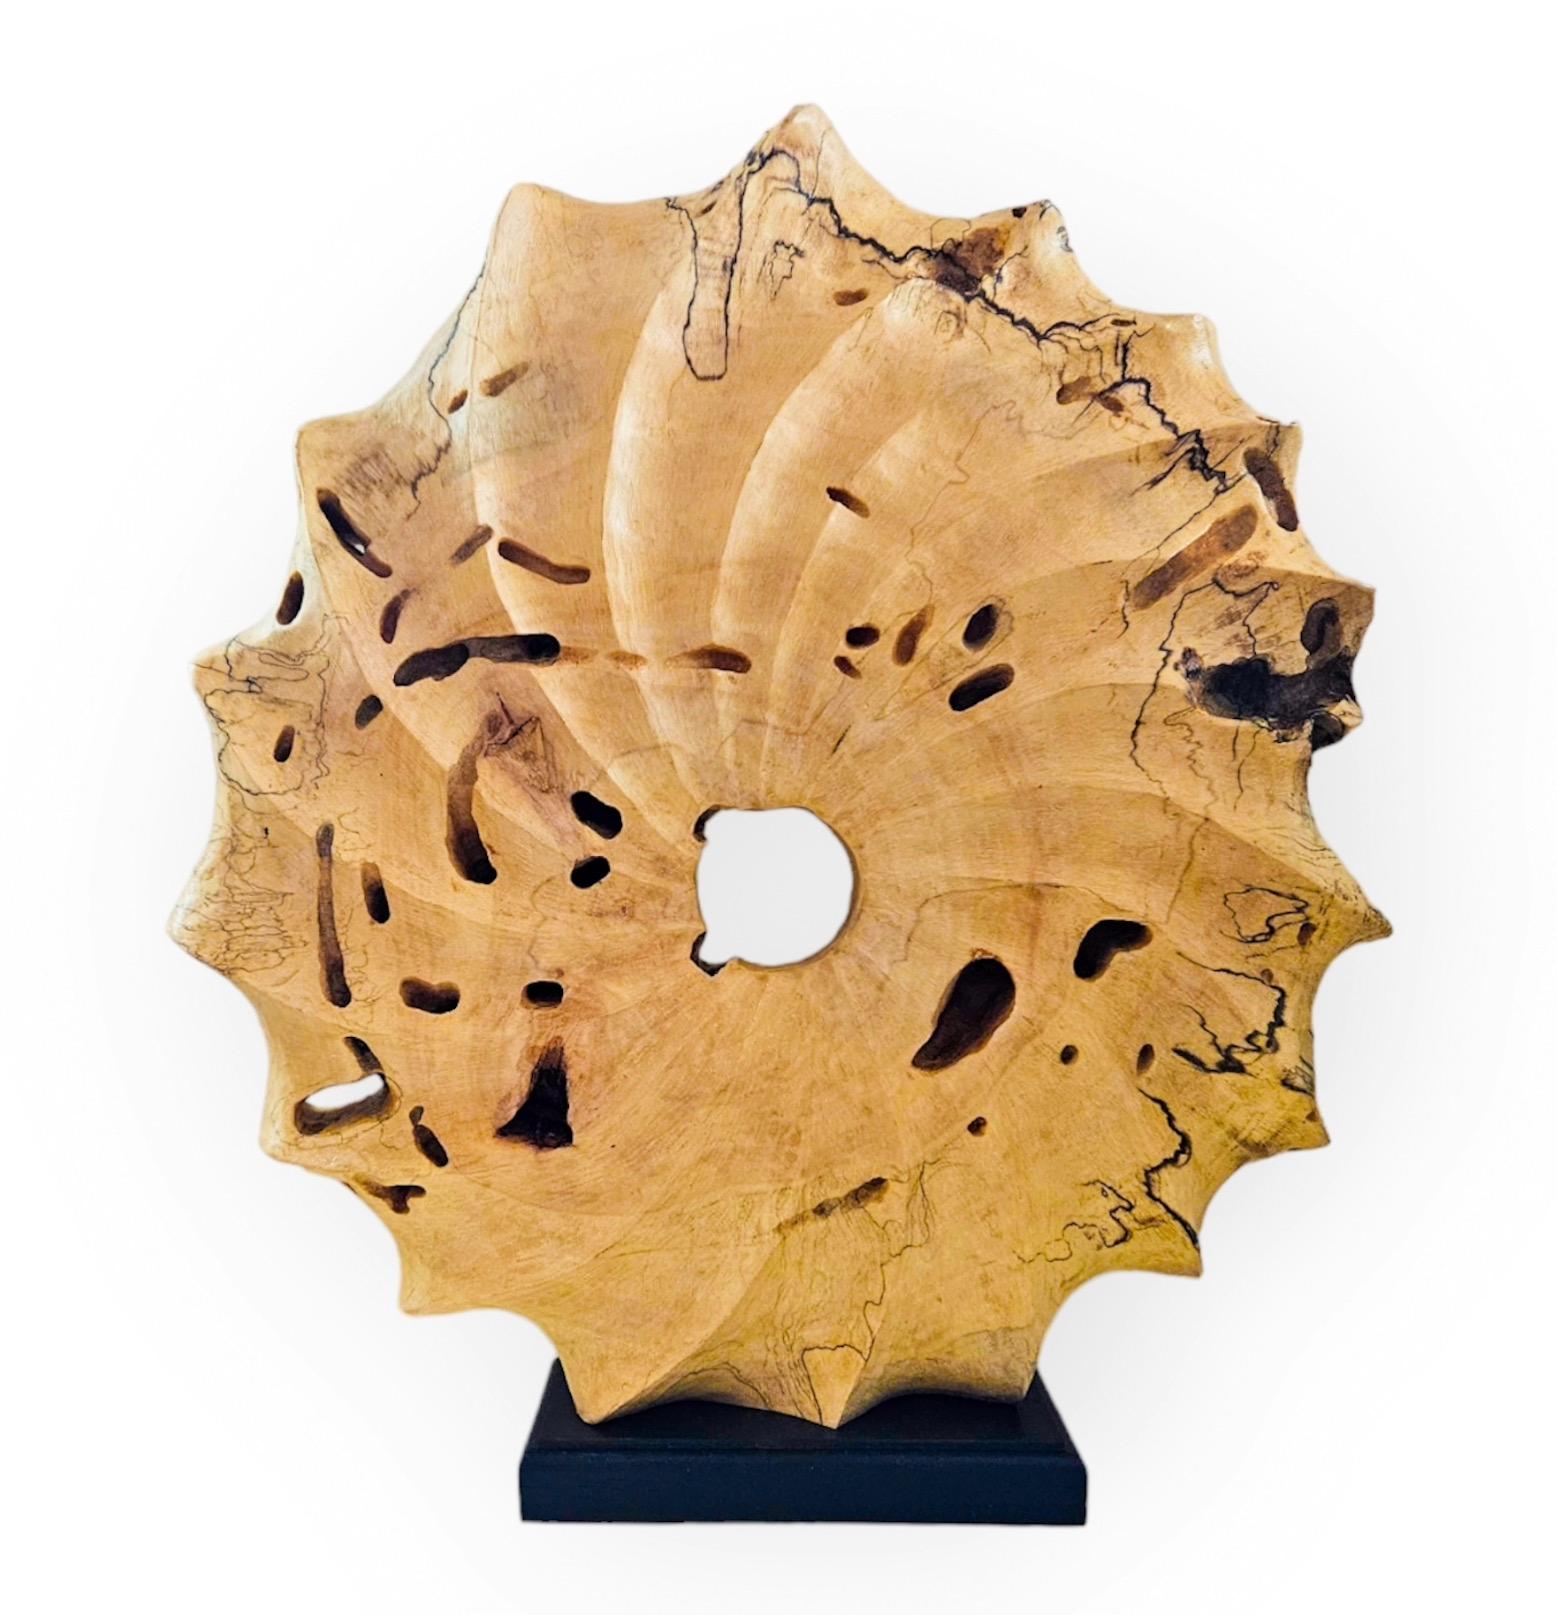 By Heiko Weiner

This hand-carved wooden sculpture is the second piece in the Perseverance series and is made out of a solid piece of sugar maple foraged by the artist. It is named 